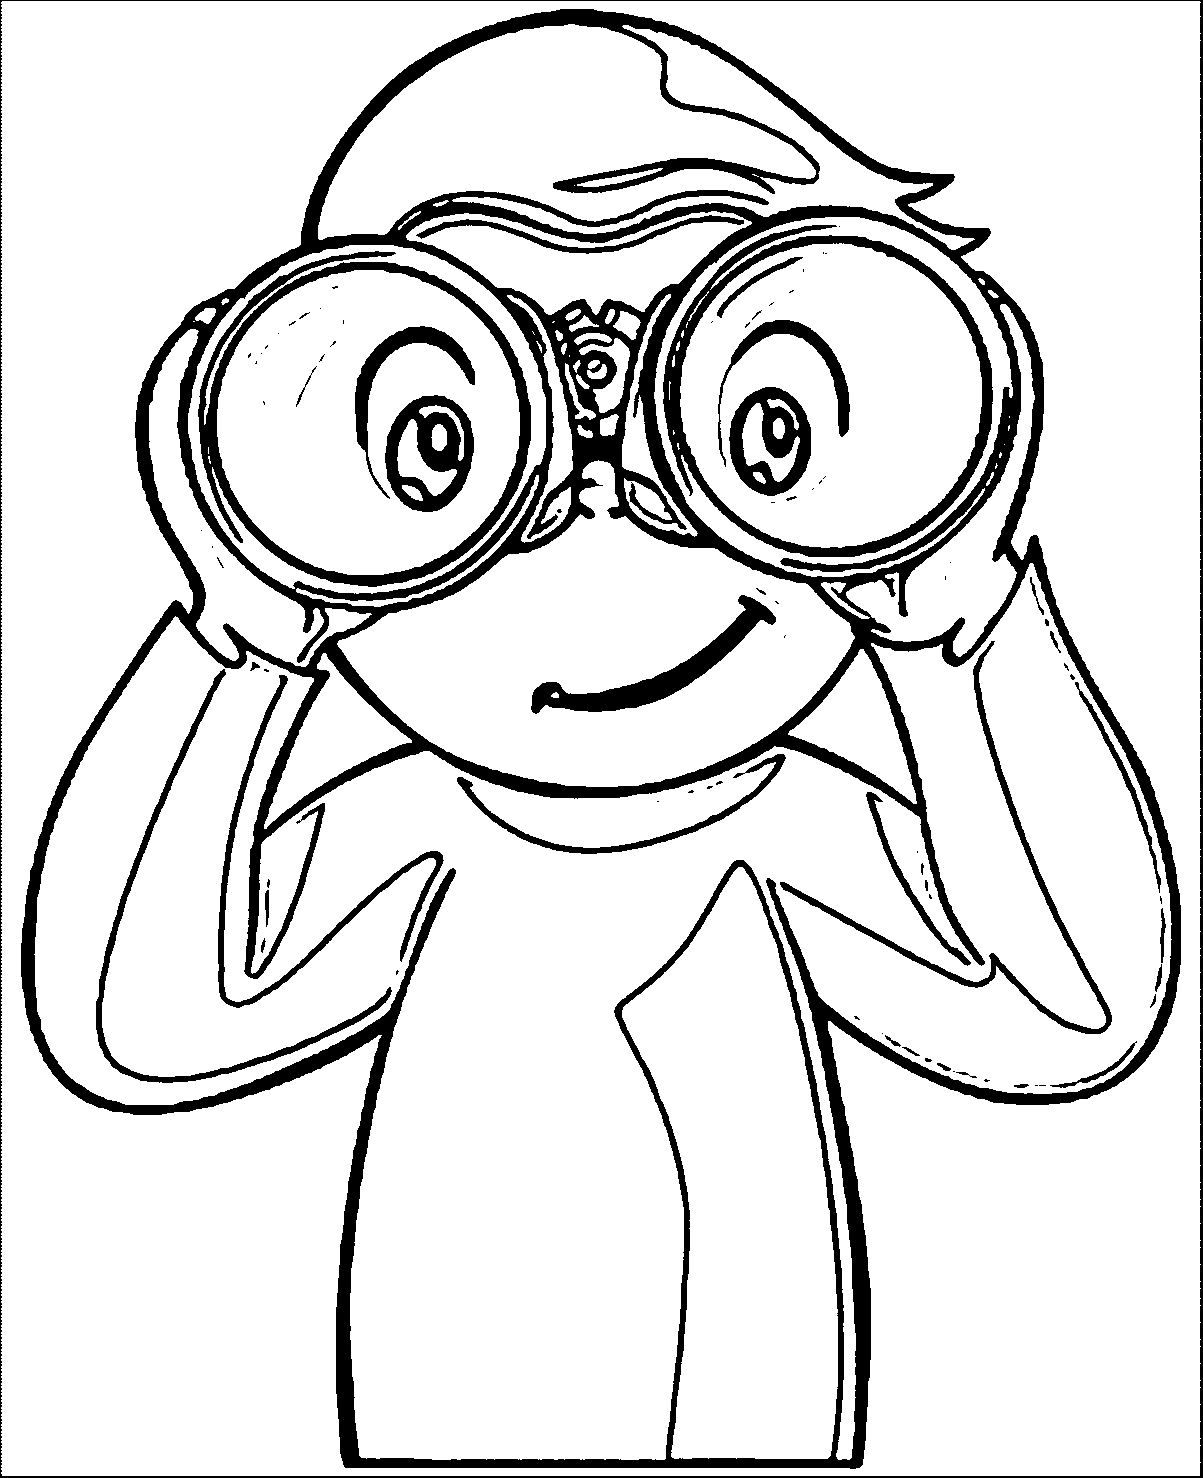 Sight Words Look Sense Coloring Page | Wecoloringpage